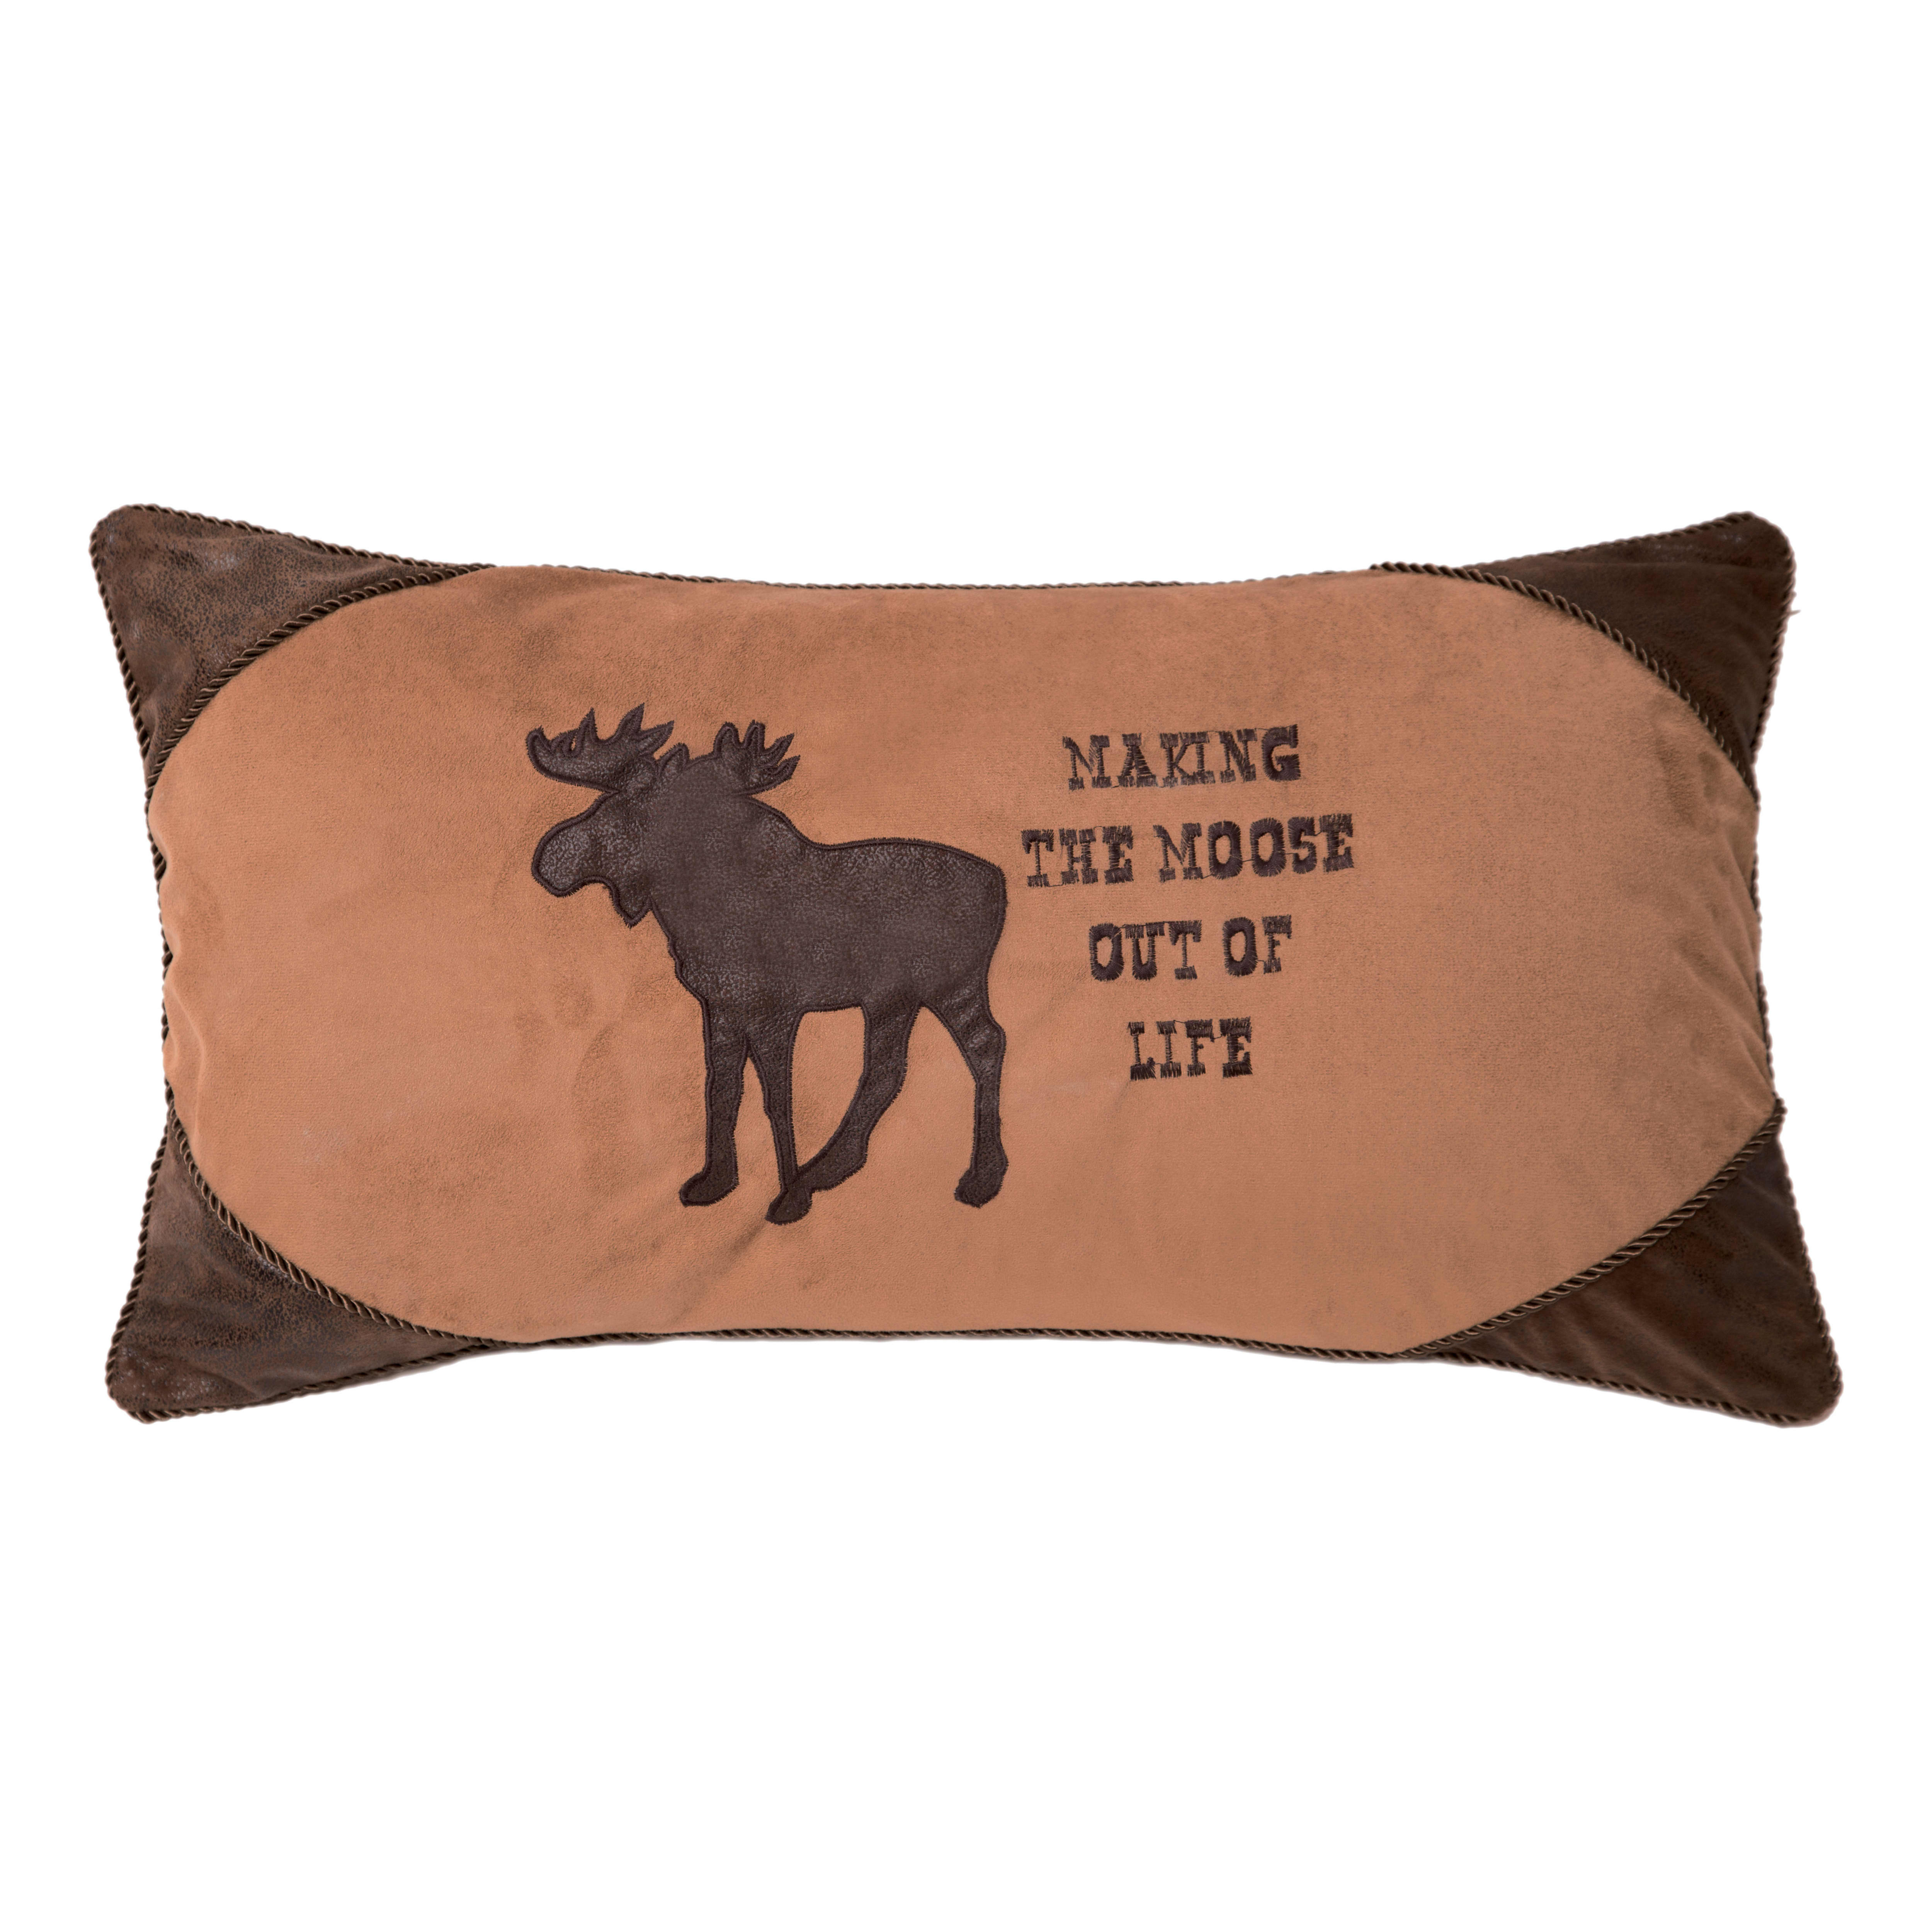 Carstens Decorative Pillows - Moose Out of Life